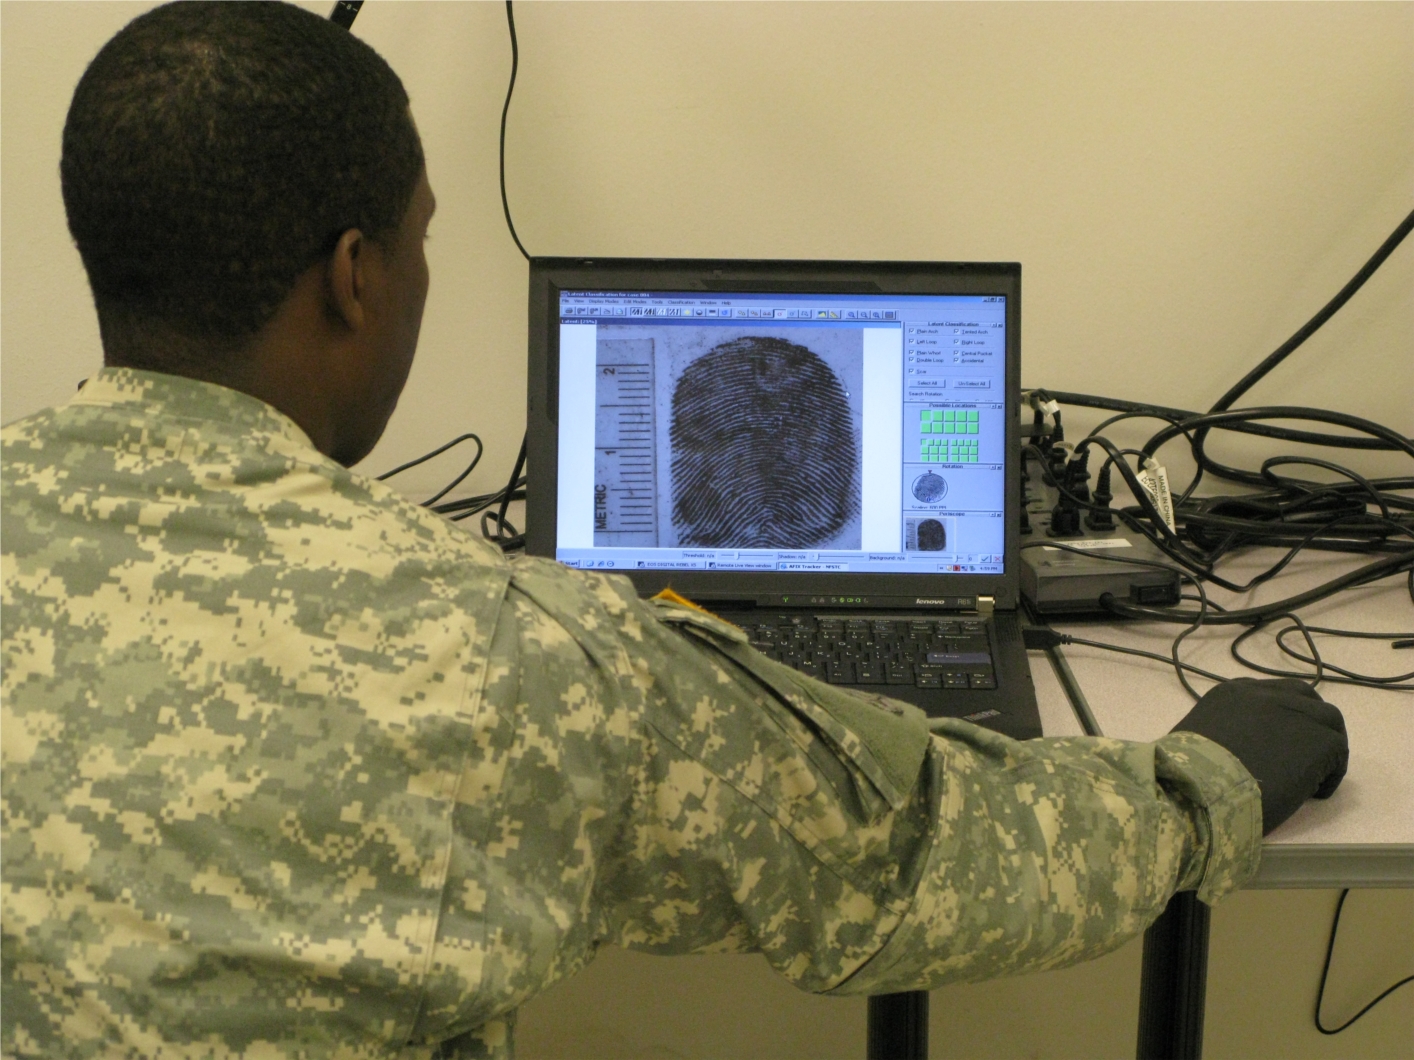 Finger print comparisons are demonstrated for a site exploitation course.